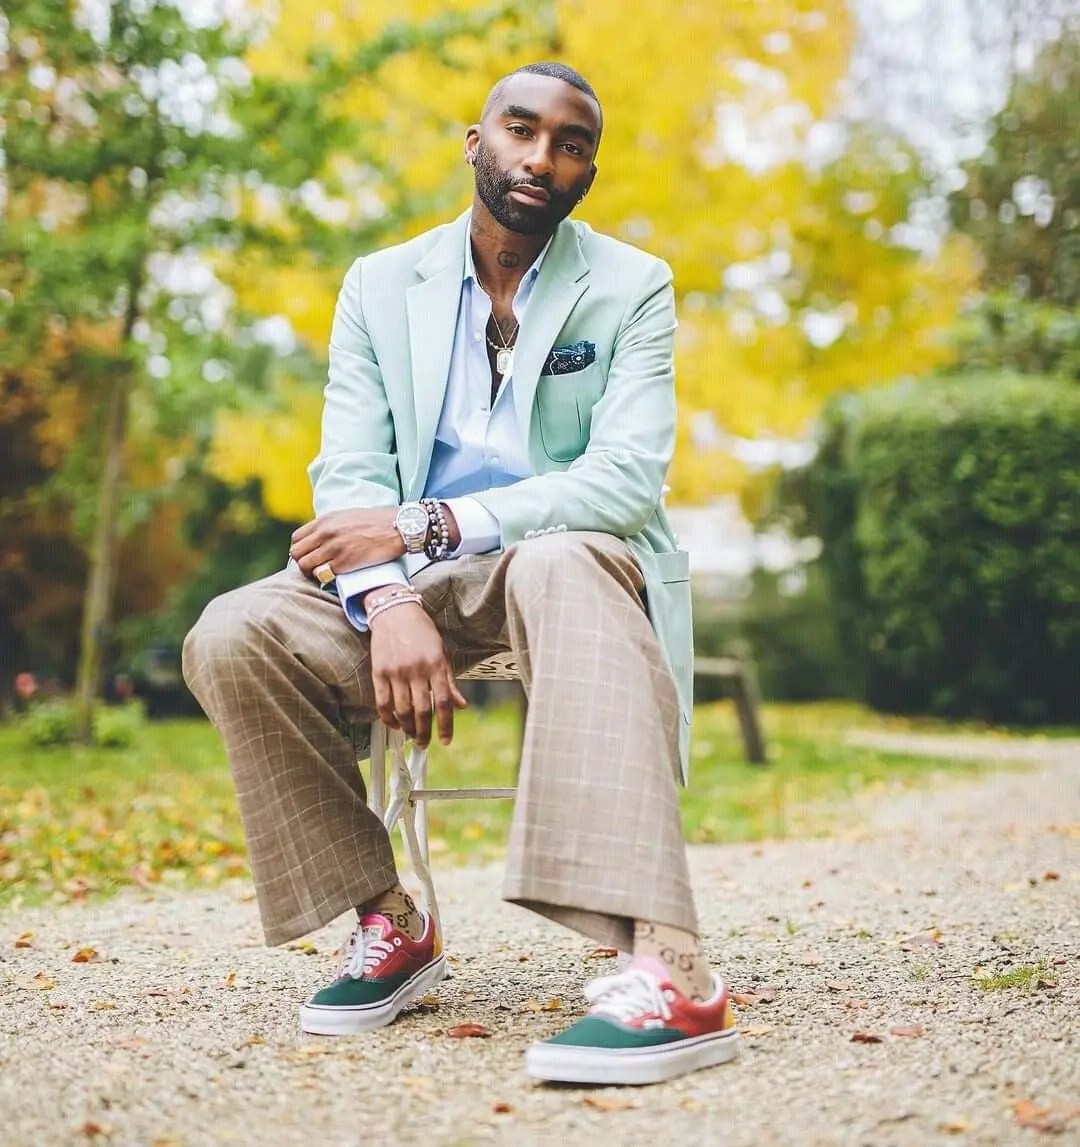 More from suicide note left by Riky Rick – Close source leaks information